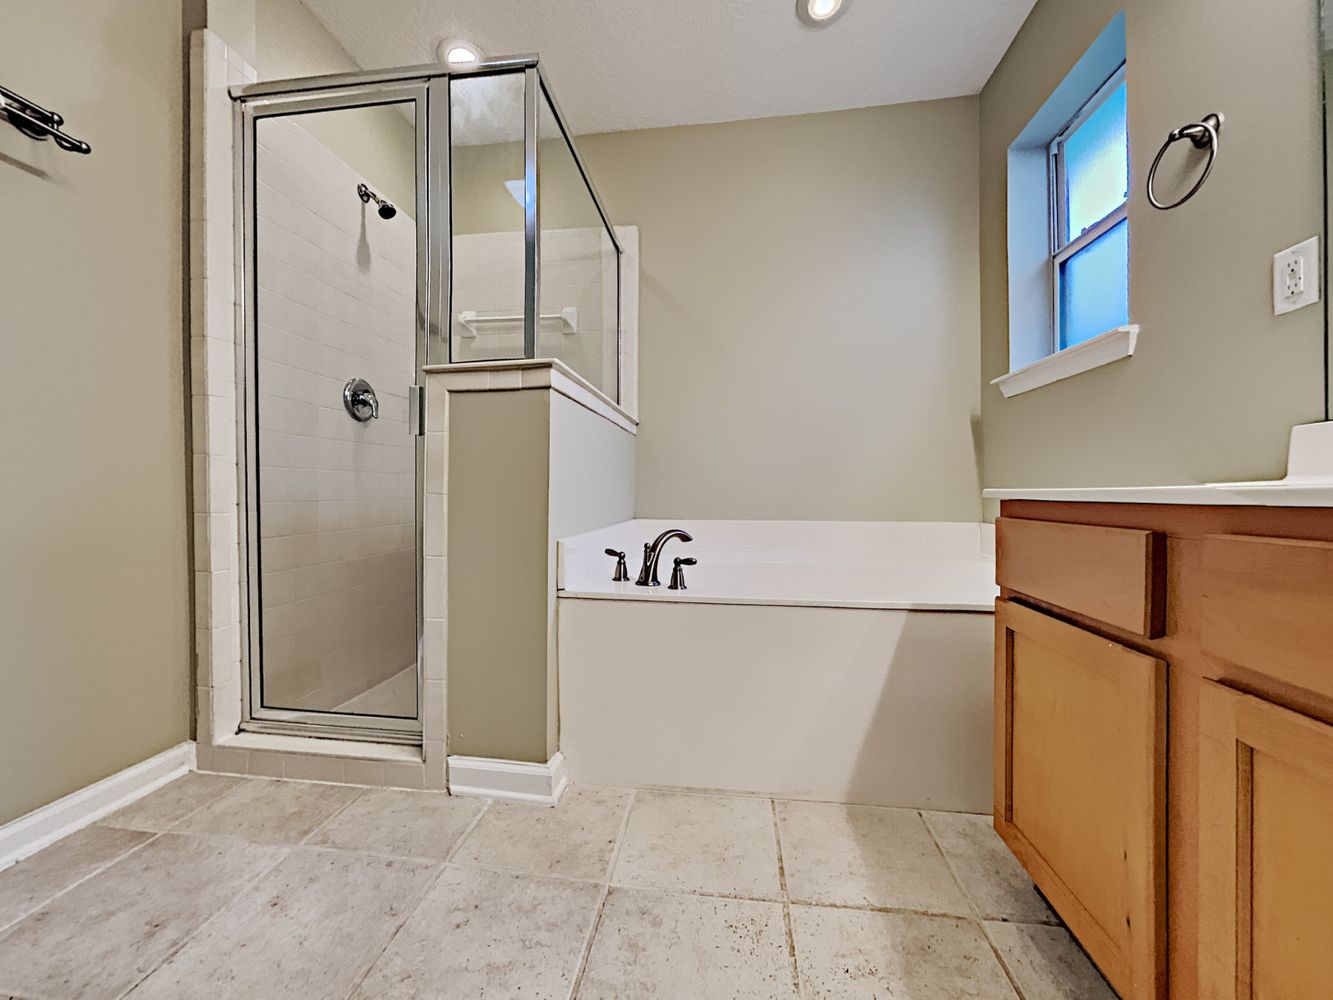 Spacious bathroom with a relaxing tub and separate shower at Invitation Homes Jacksonville.